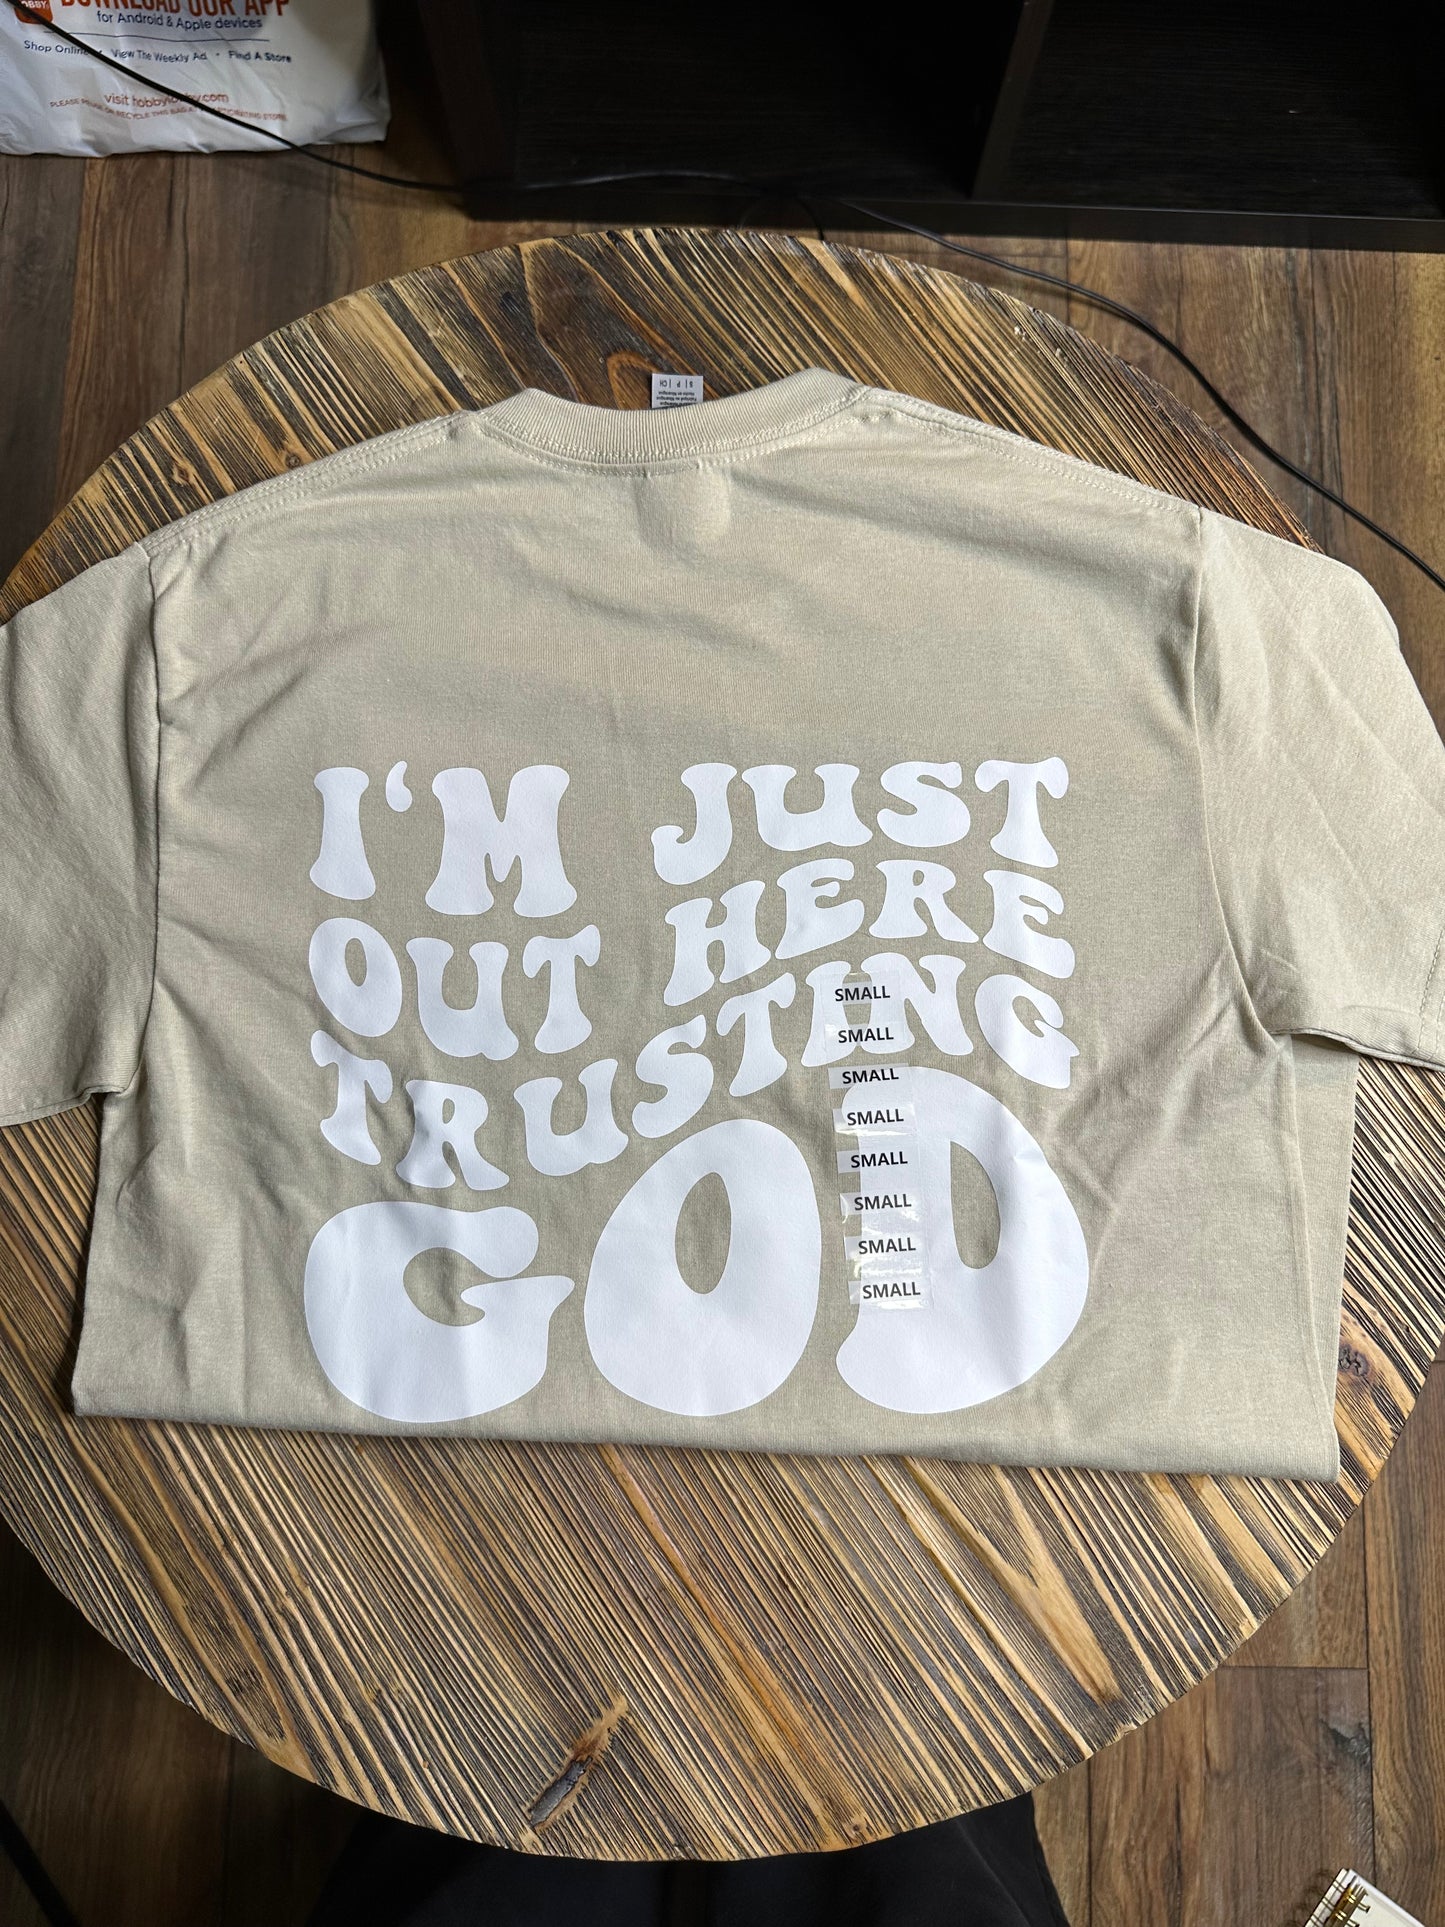 Out Here Trusting God Graphic Tee